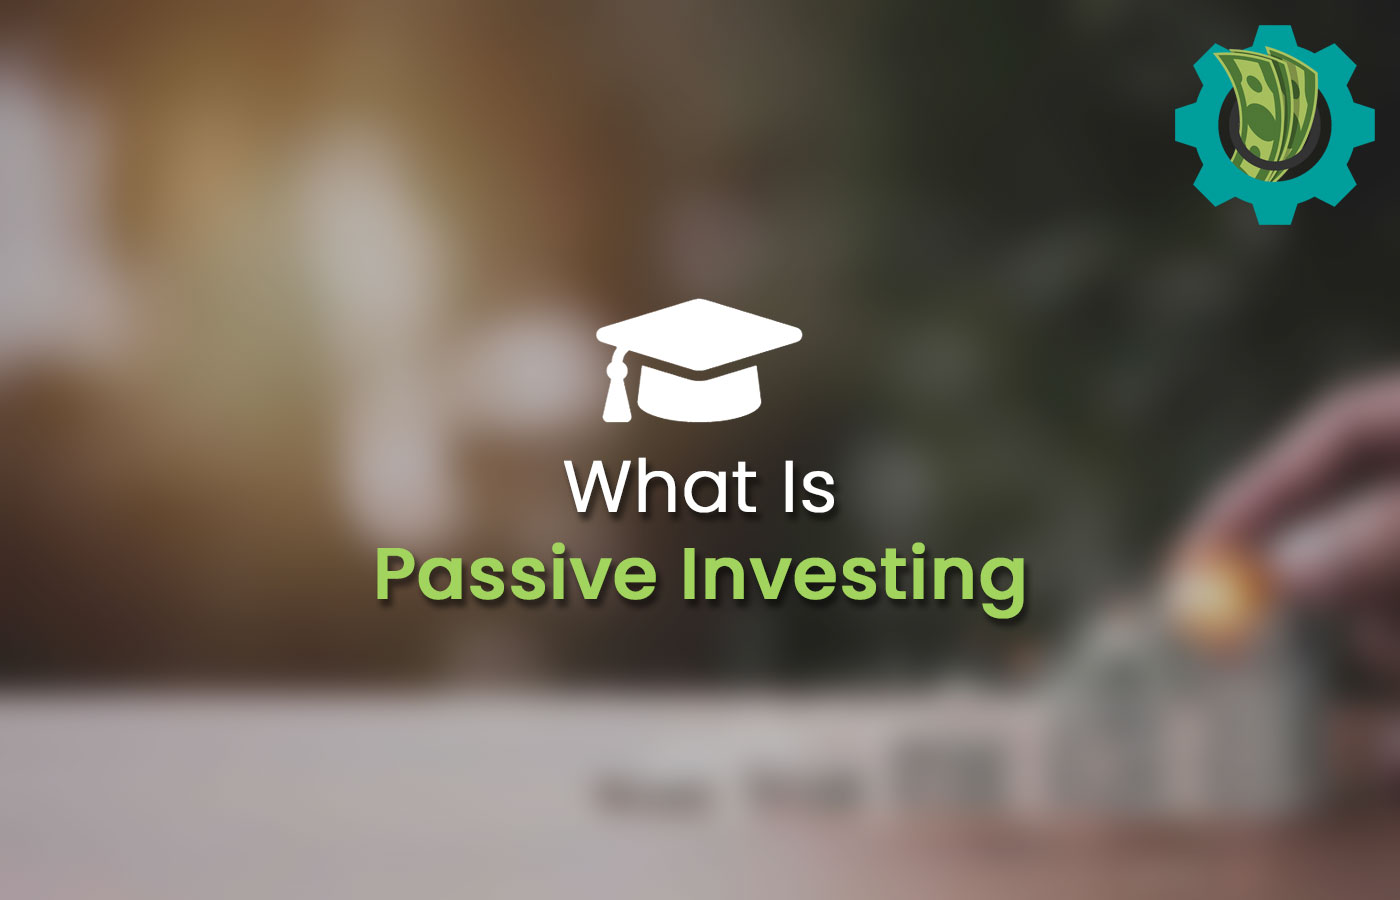 Investor using a passive investing strategy to grow wealth